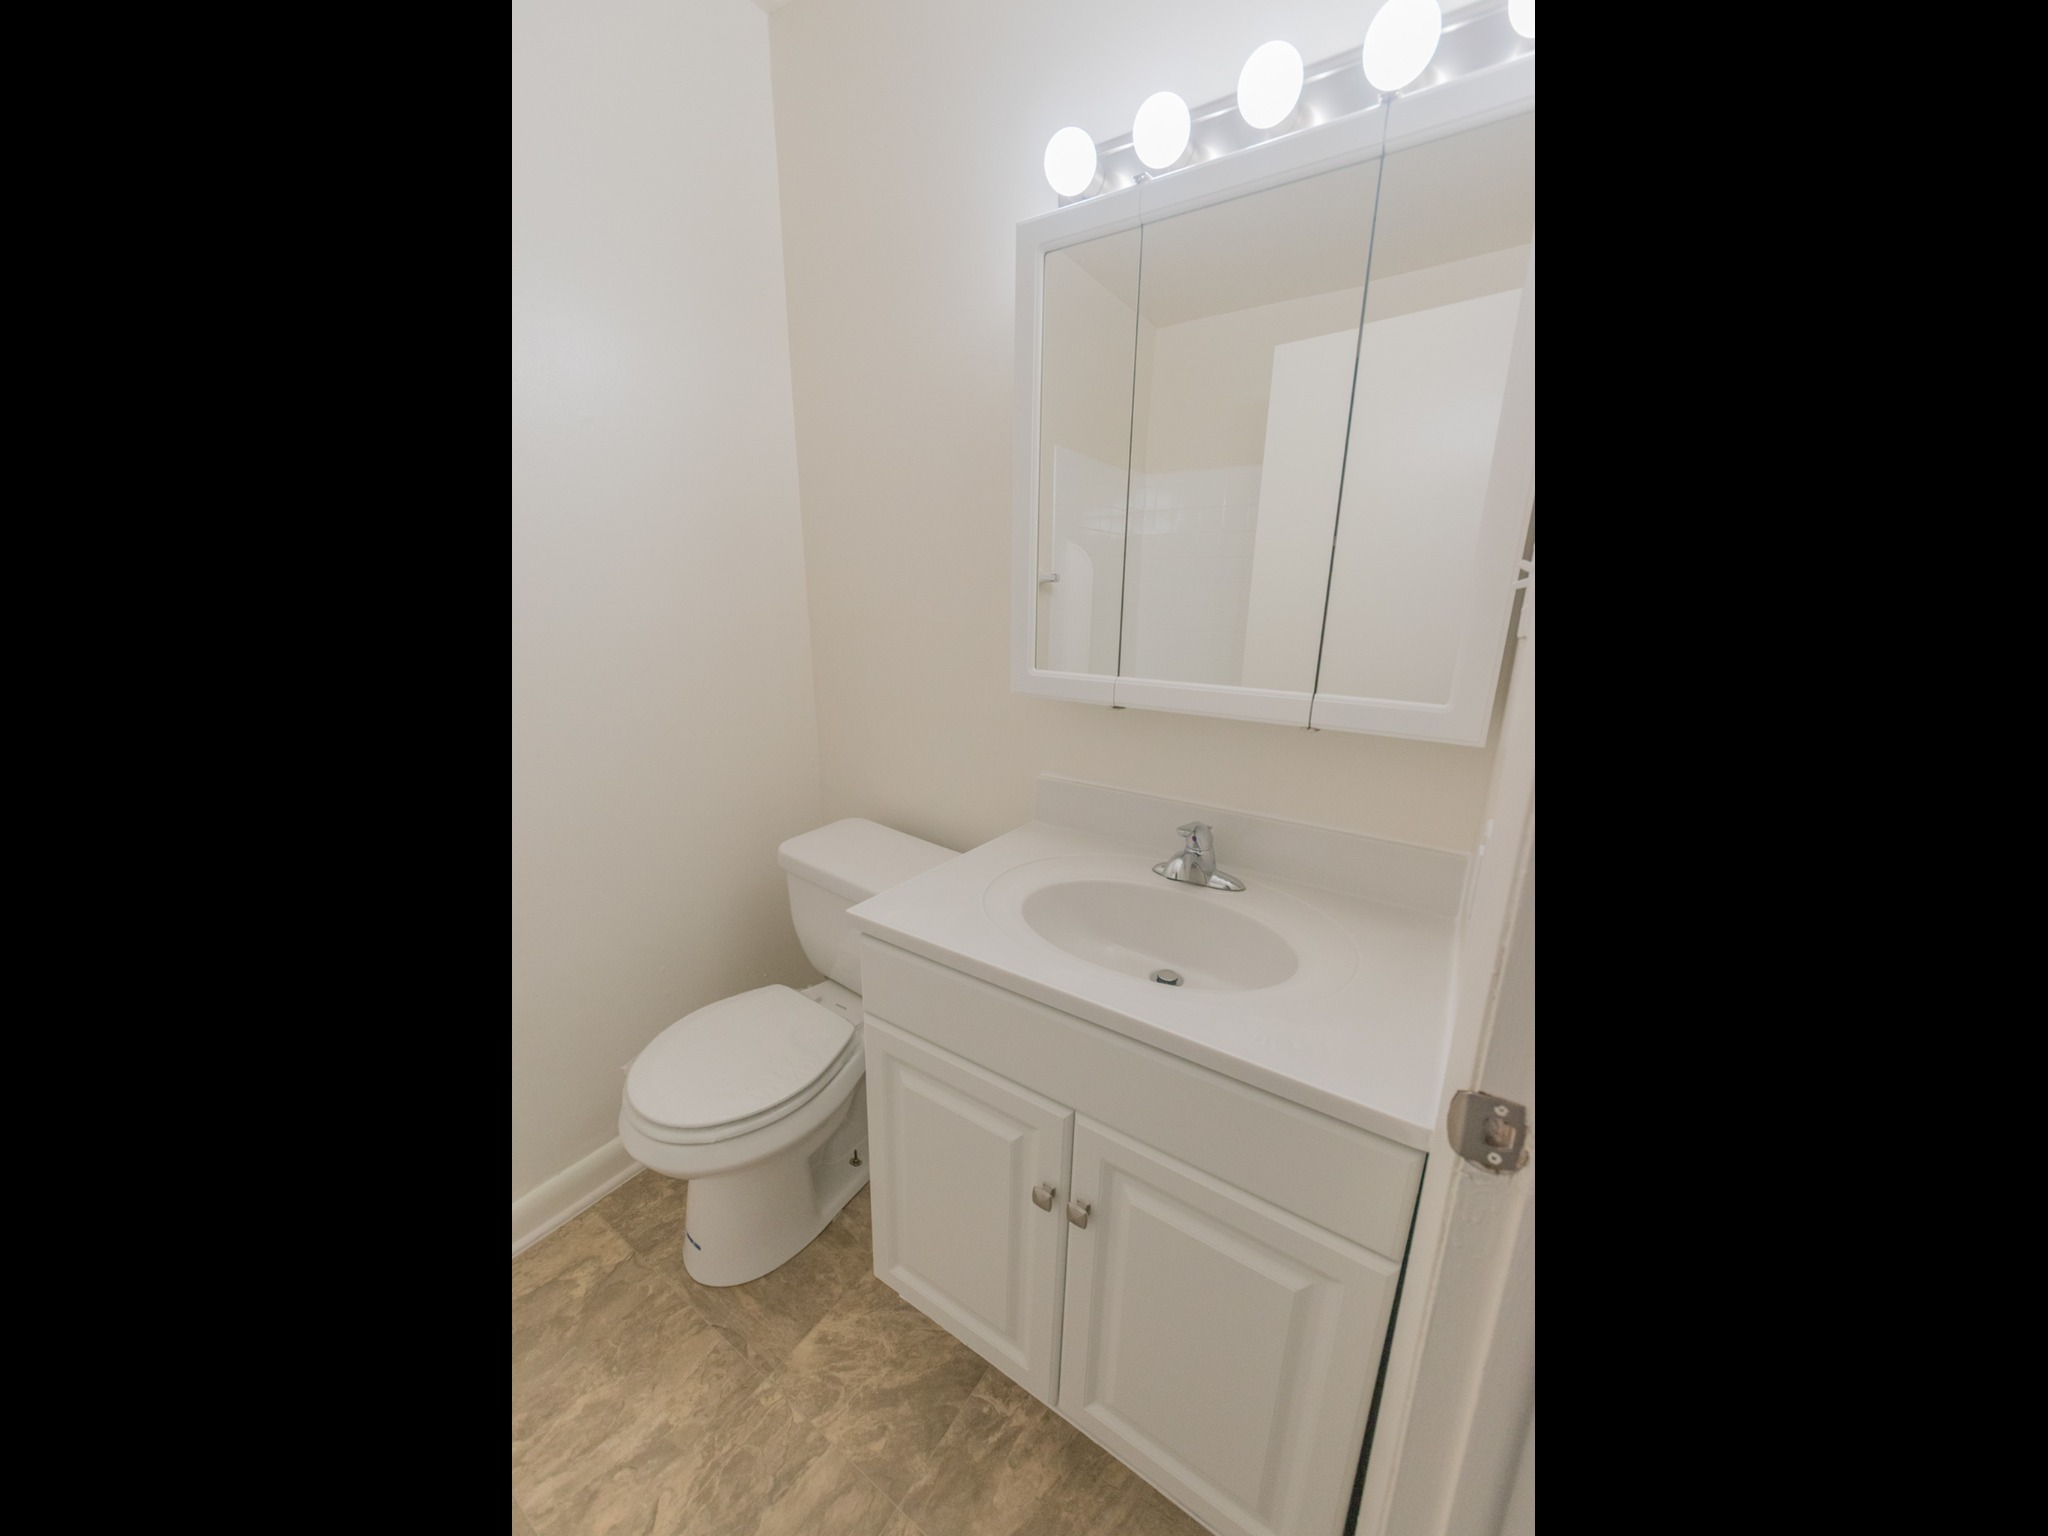 Bathroom with vanity lights, a mirror, a sink, and a toilet.